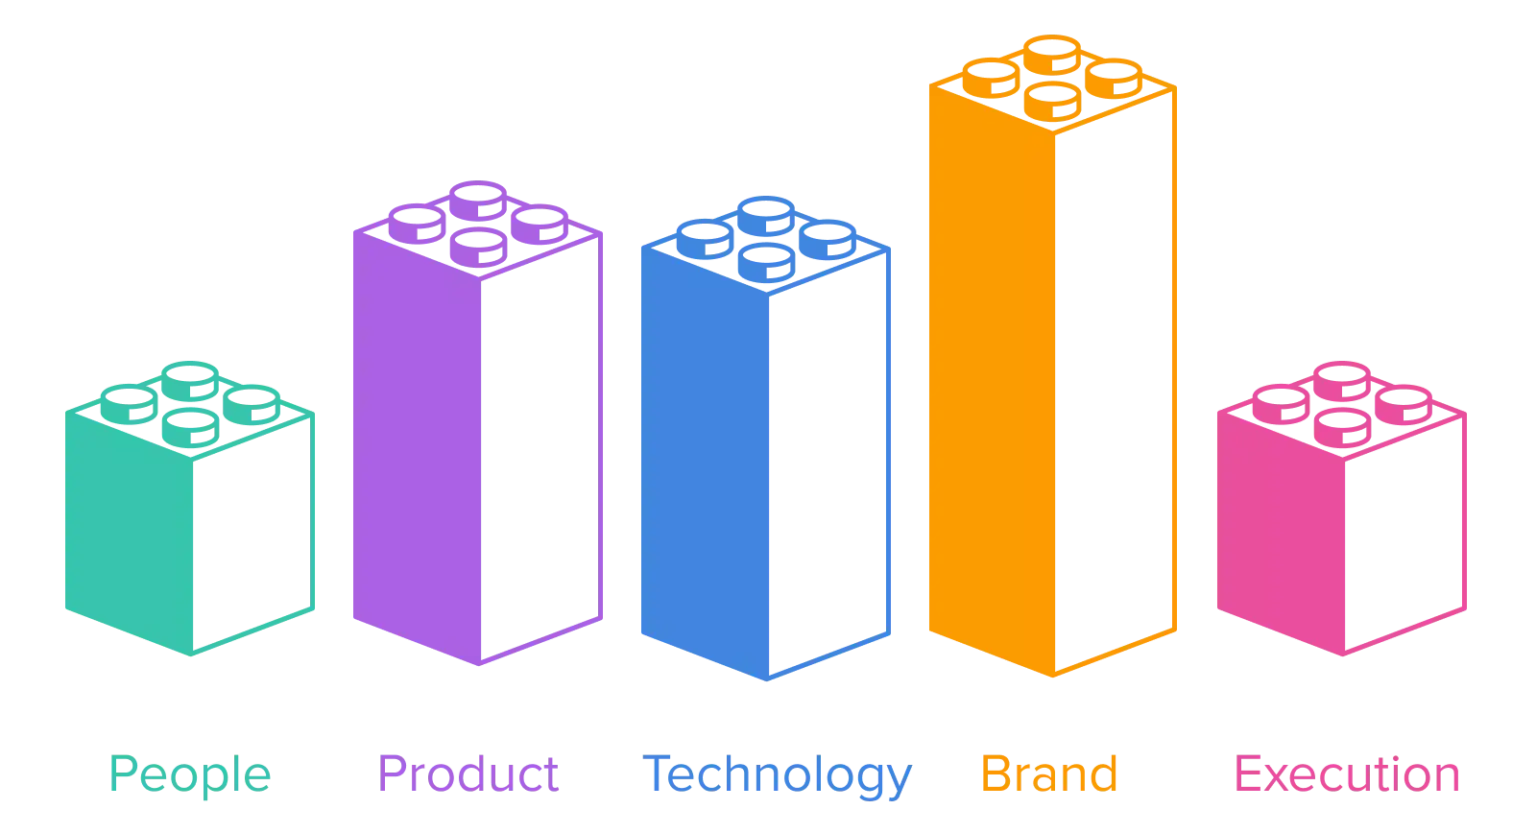 Very tall bar for brand; tall bars for product and technology; medium bars for people and execution